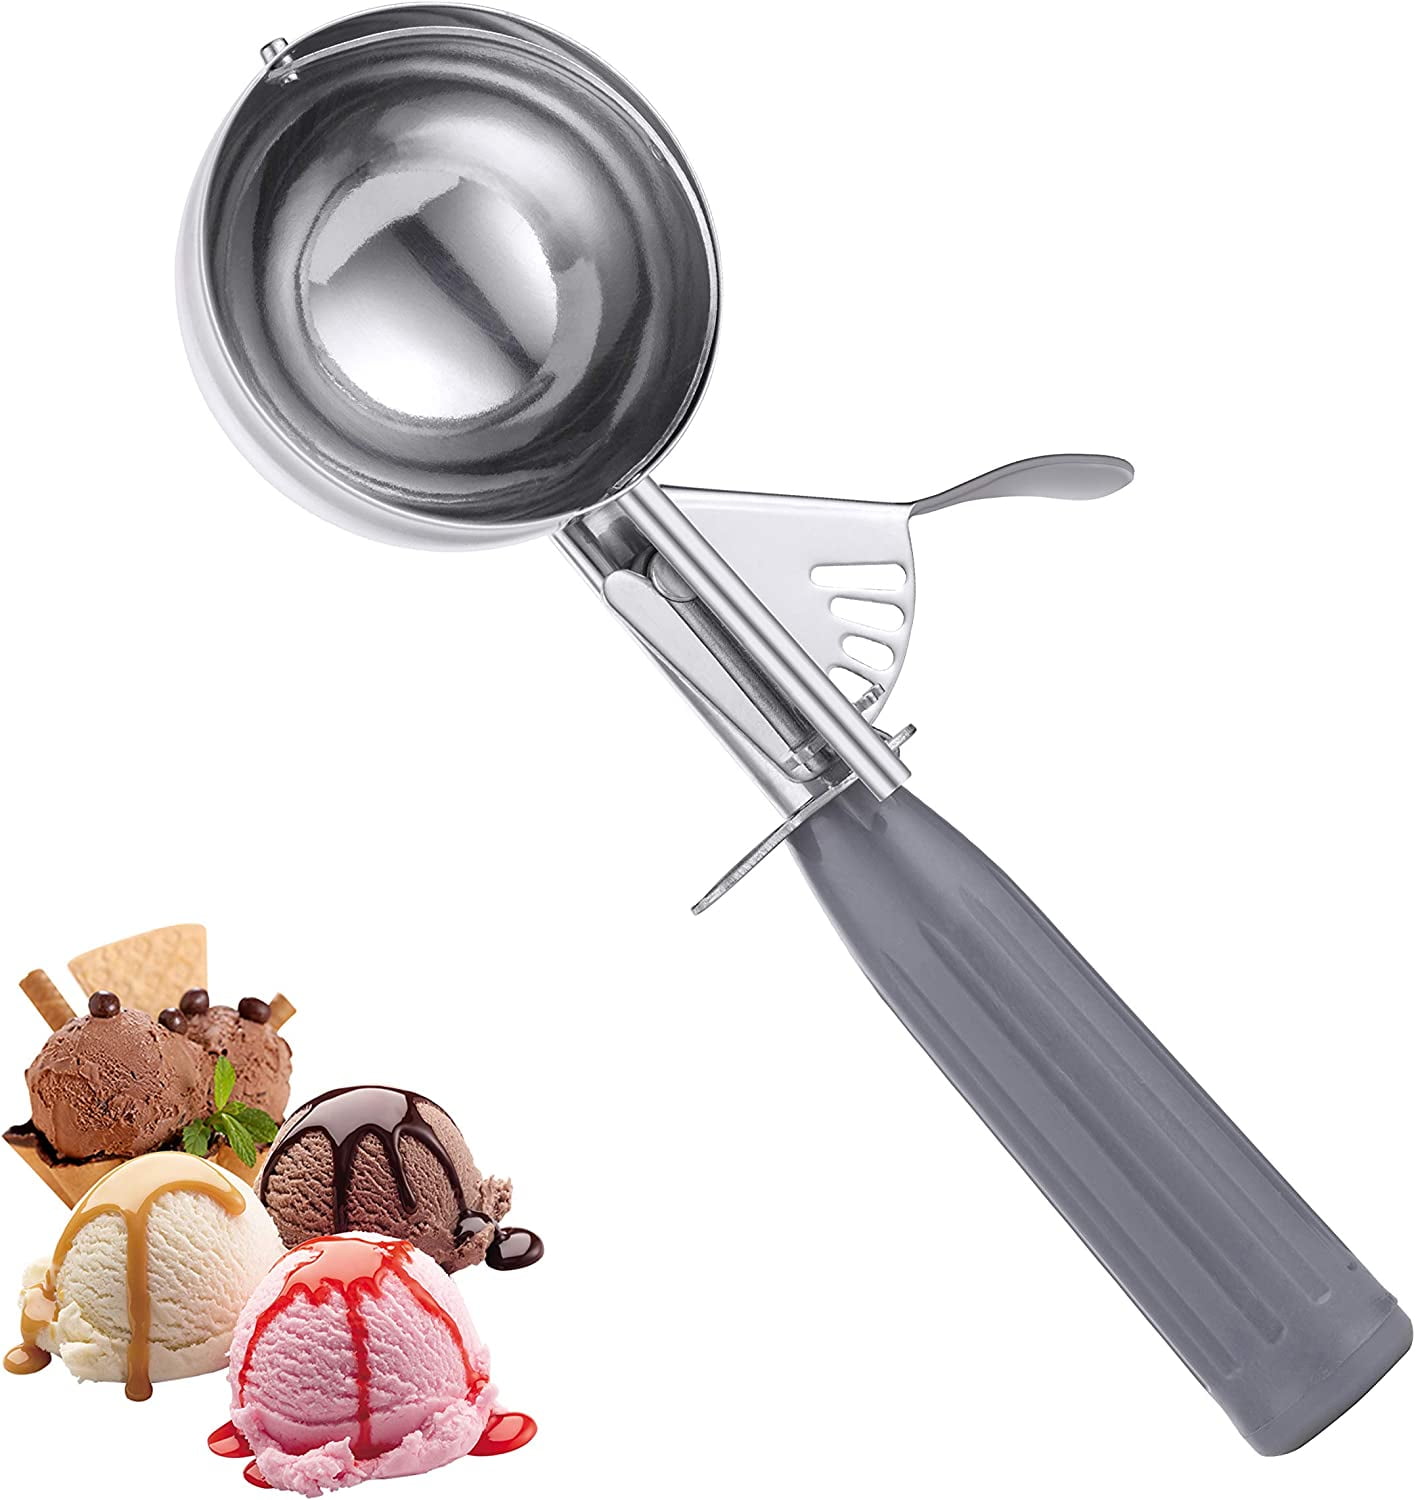 Comfy Grip 4 oz Stainless Steel #8 Ice Cream Scoop - with Gray Handle - 1  count box